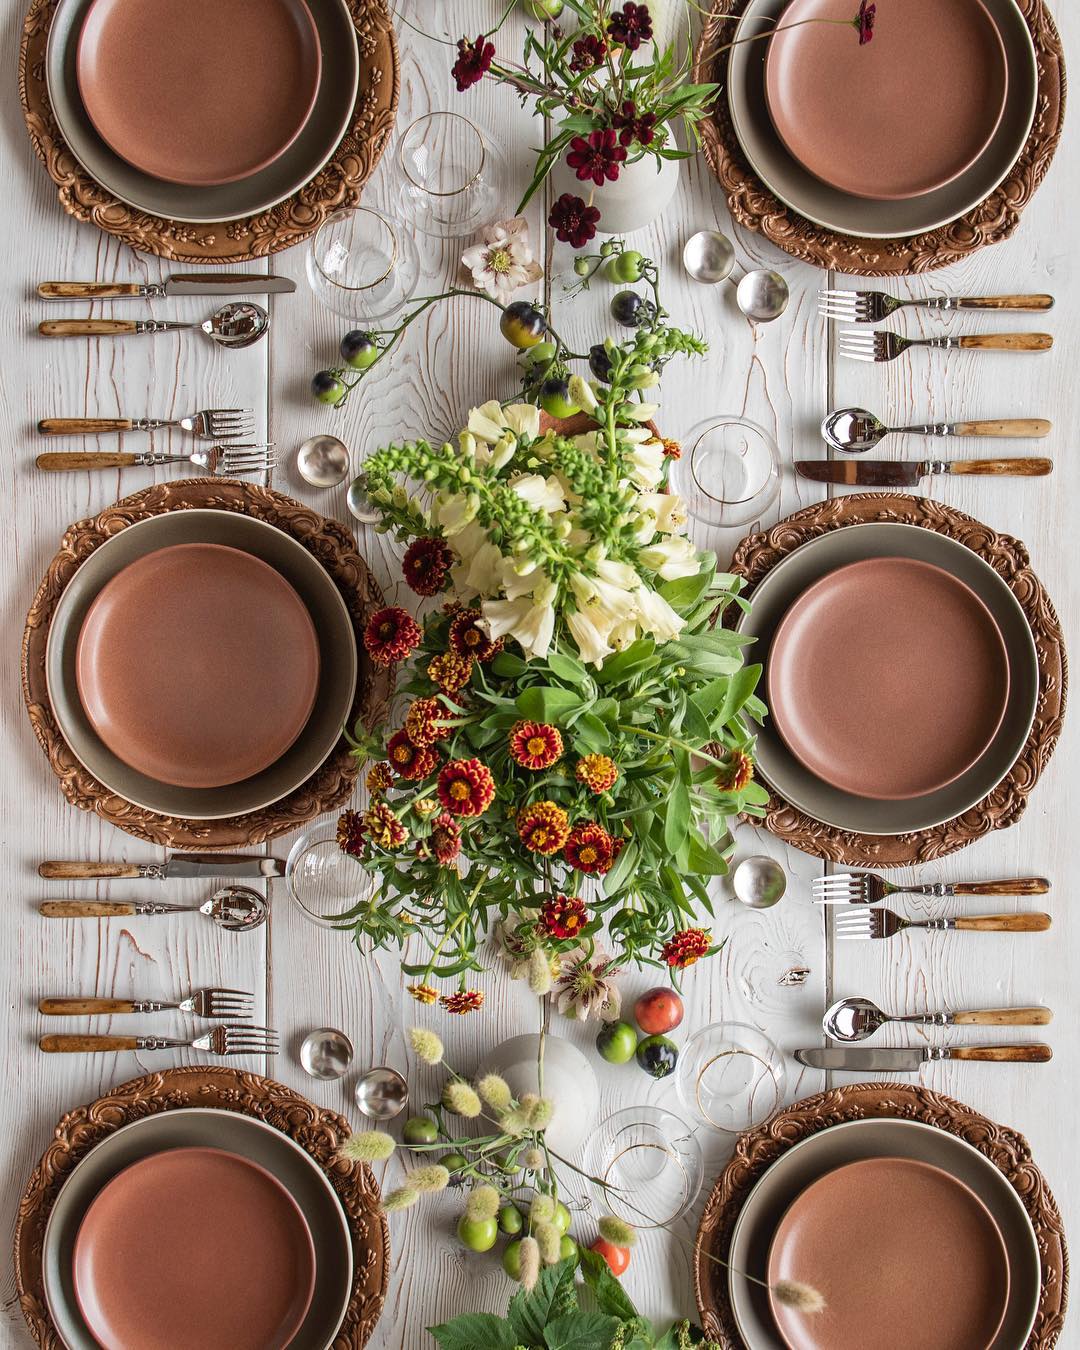 terra cotta dishes and fun florals for a fall table | inspiring thanksgiving table setting ideas on coco kelley